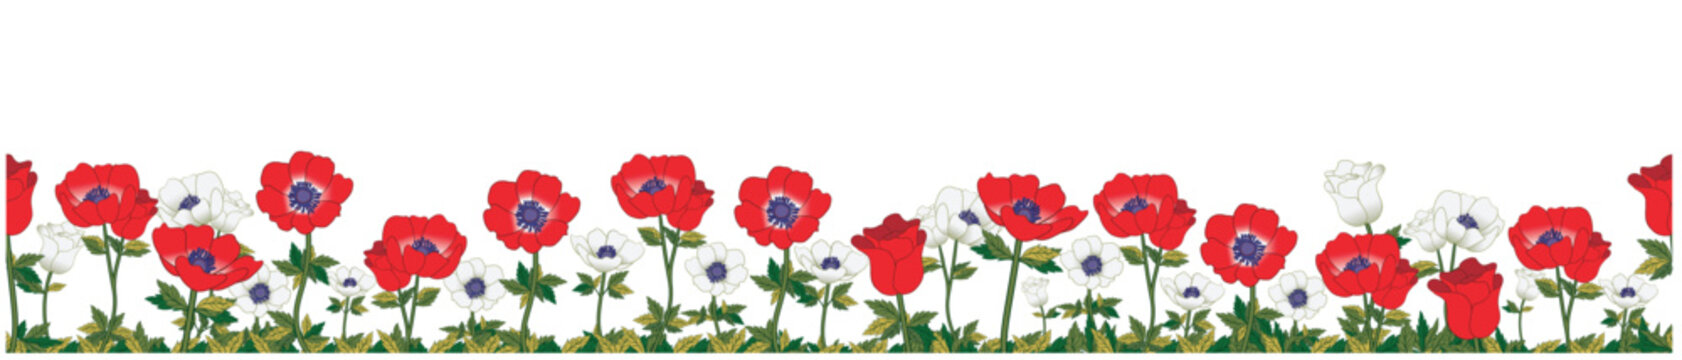 Horizontal banner decorated with red and white anemone flowers and leaves border. Seamless multicolor blooming Spring botanical drawing. Vector illustration on transparent background.